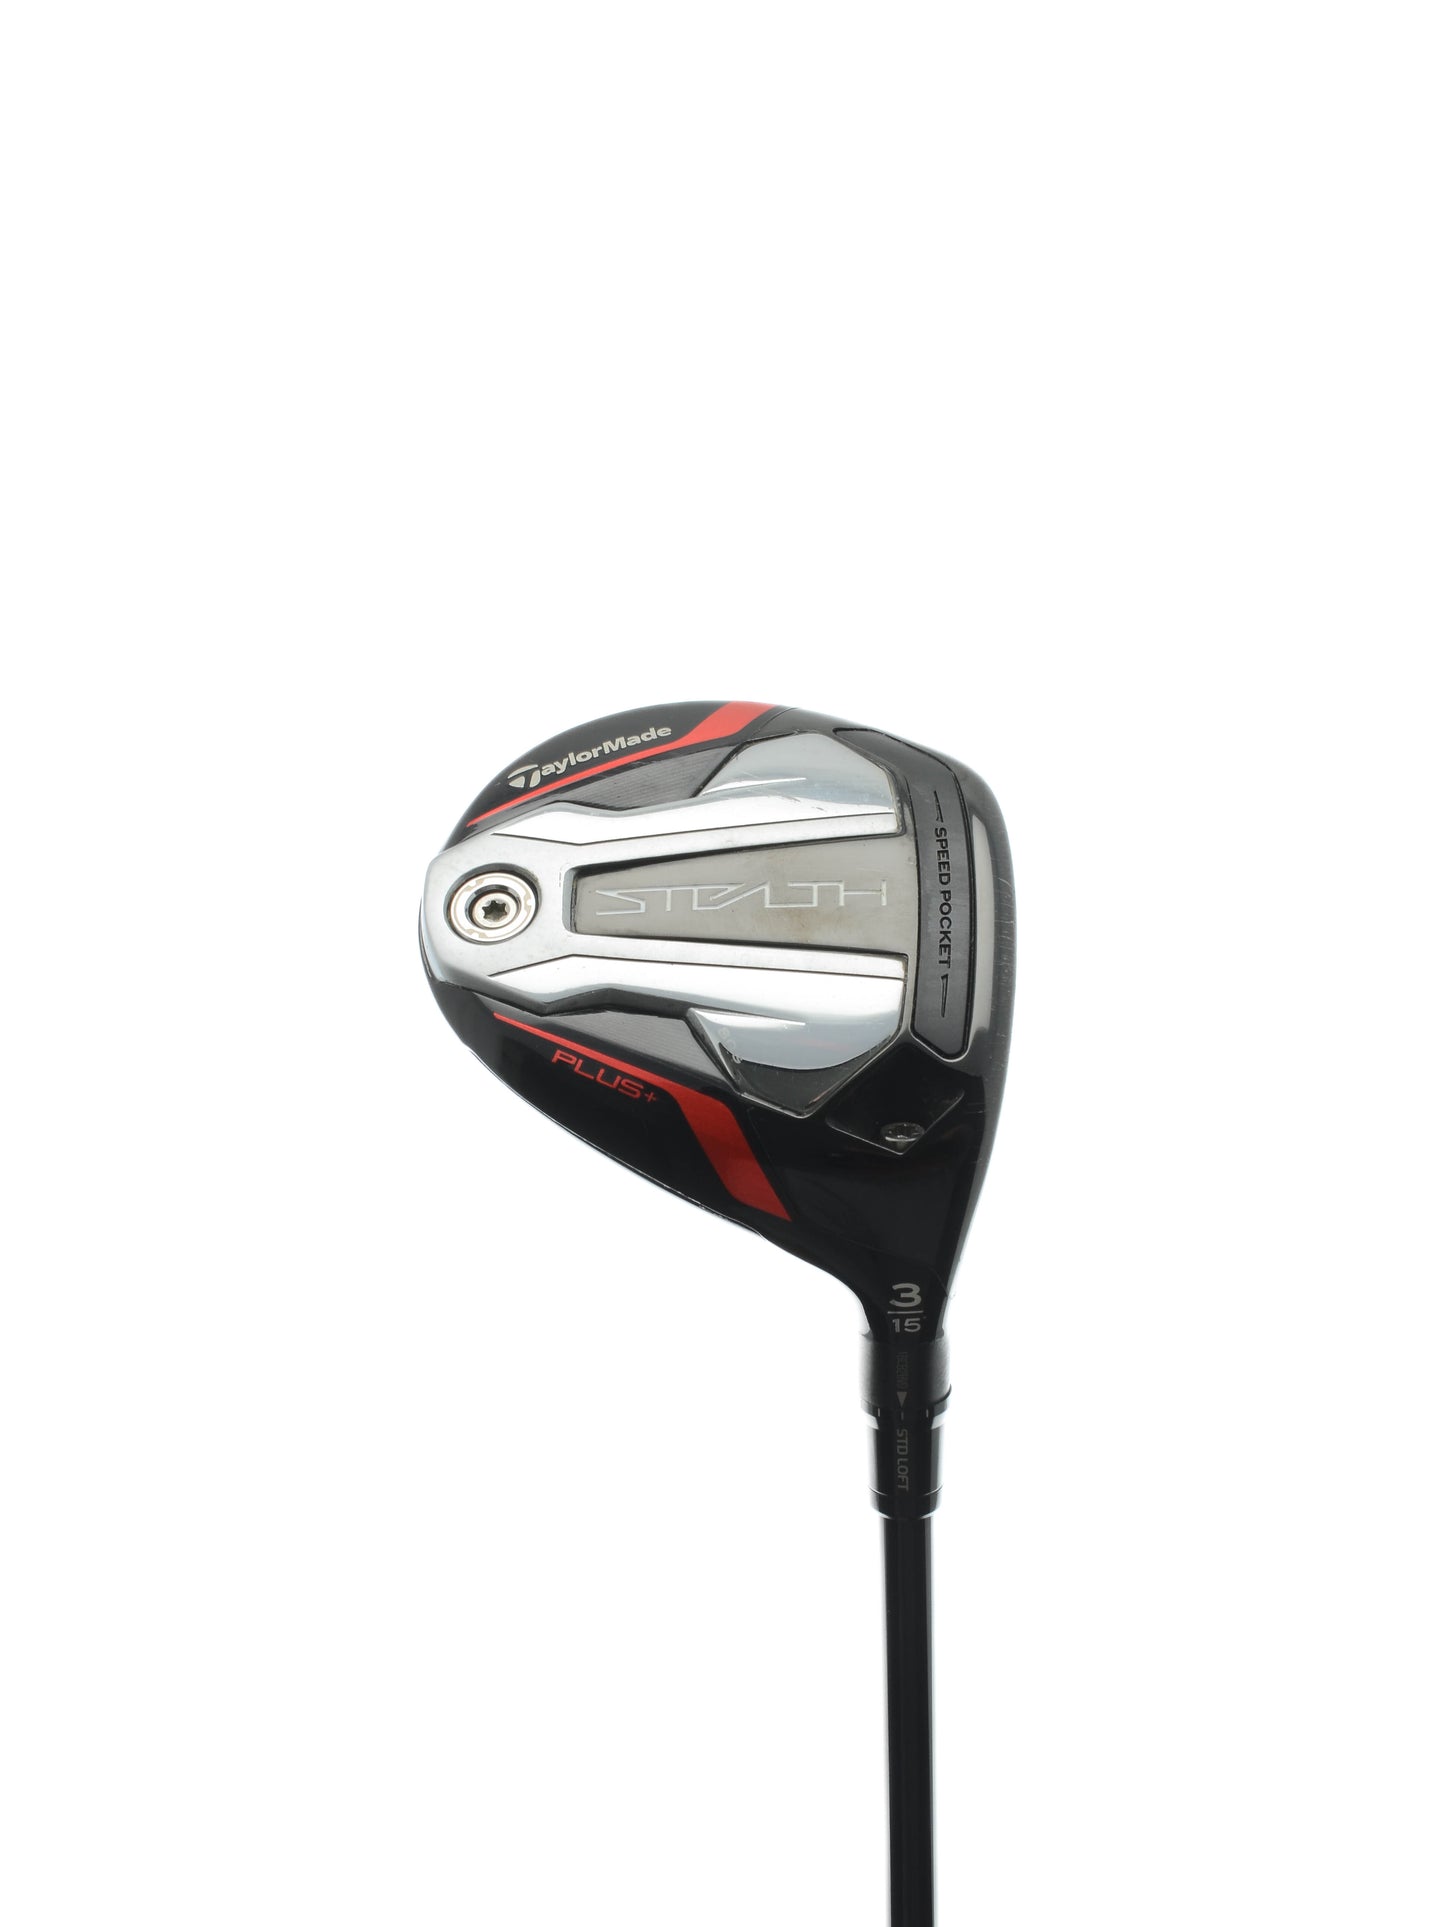 Taylormade Stealth + 3/15